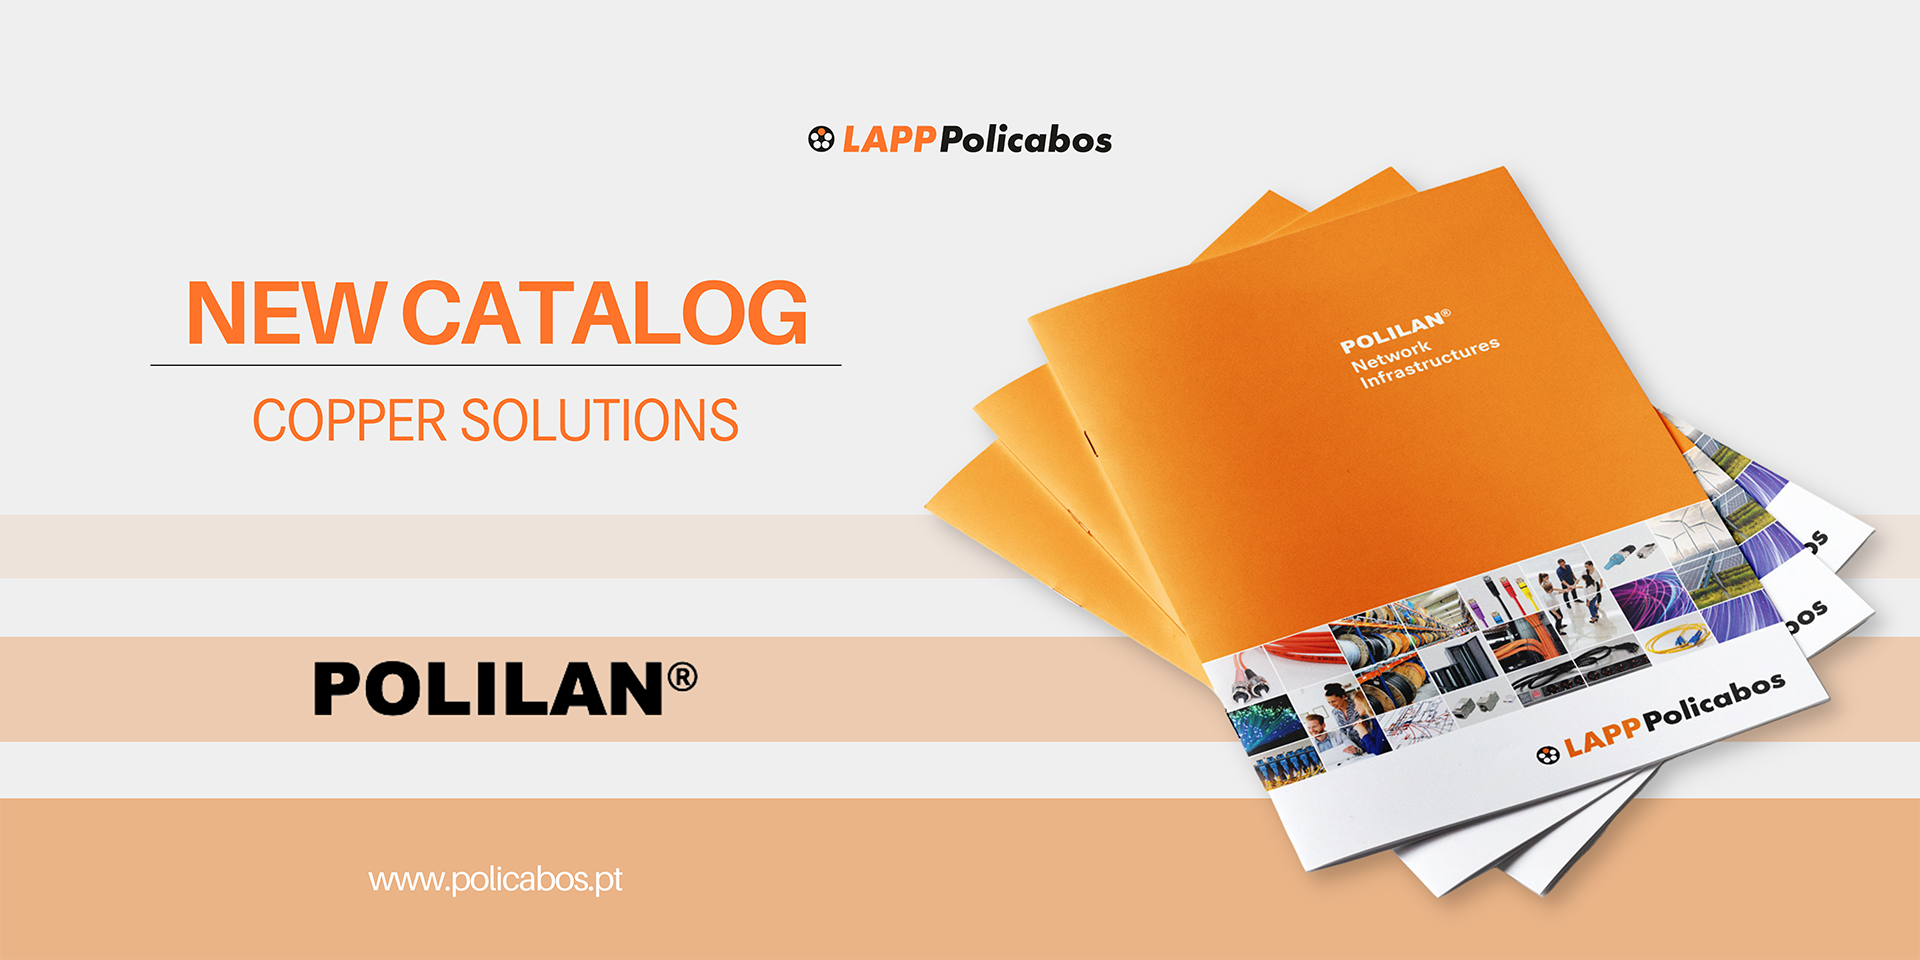 Get to know the new Copper Solutions of the new POLILAN catalog for Communications Network Infrastructures